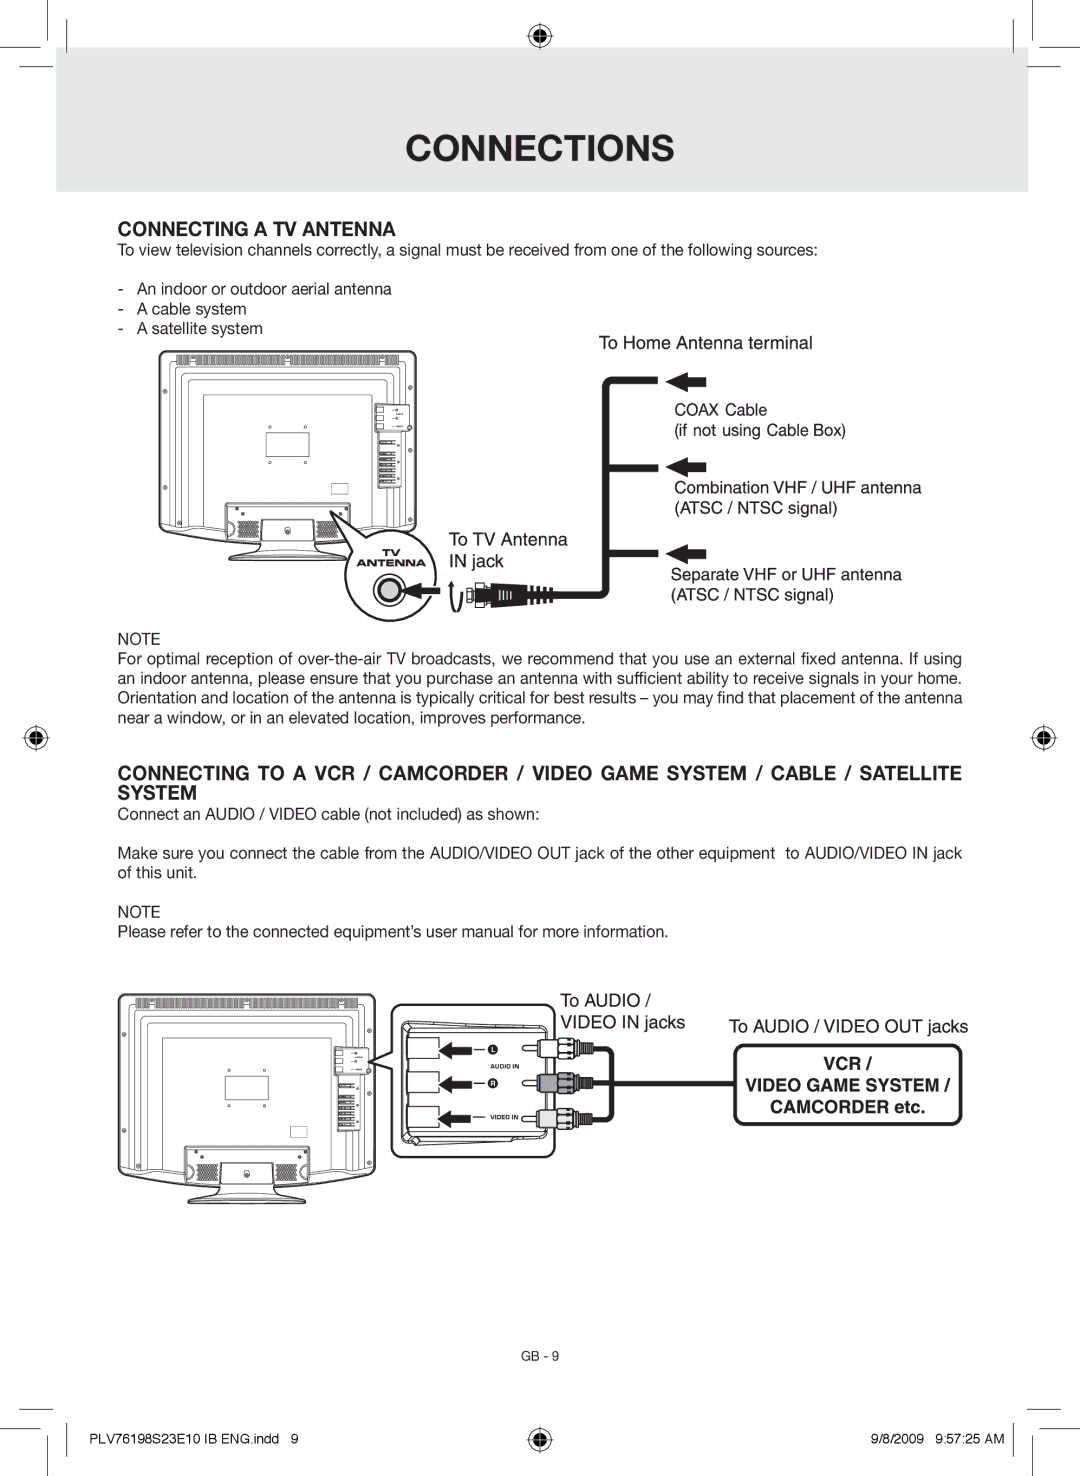 Venturer PLV76198E owner manual Connections, Connecting a TV Antenna 